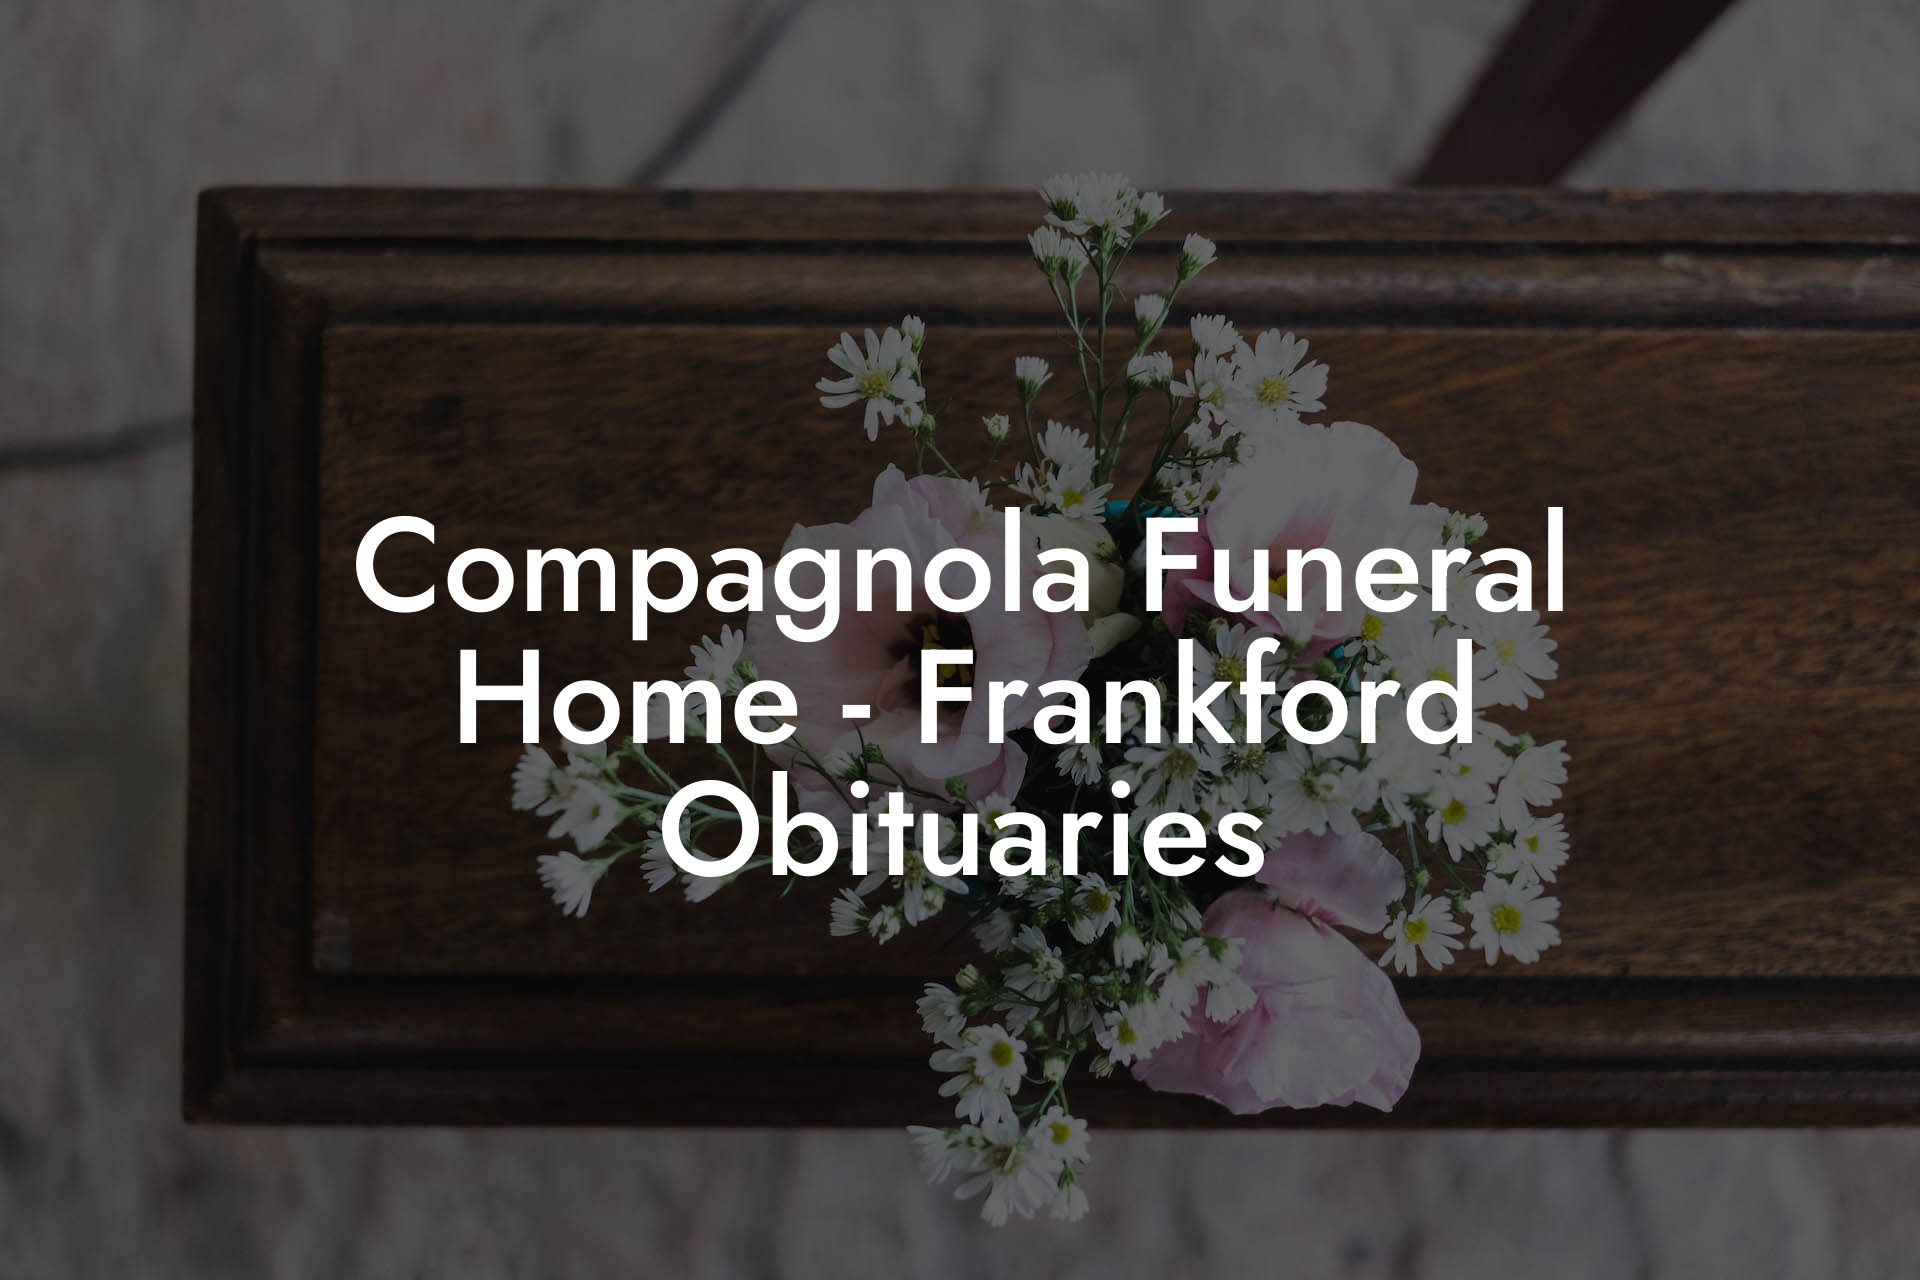 Compagnola Funeral Home - Frankford Obituaries